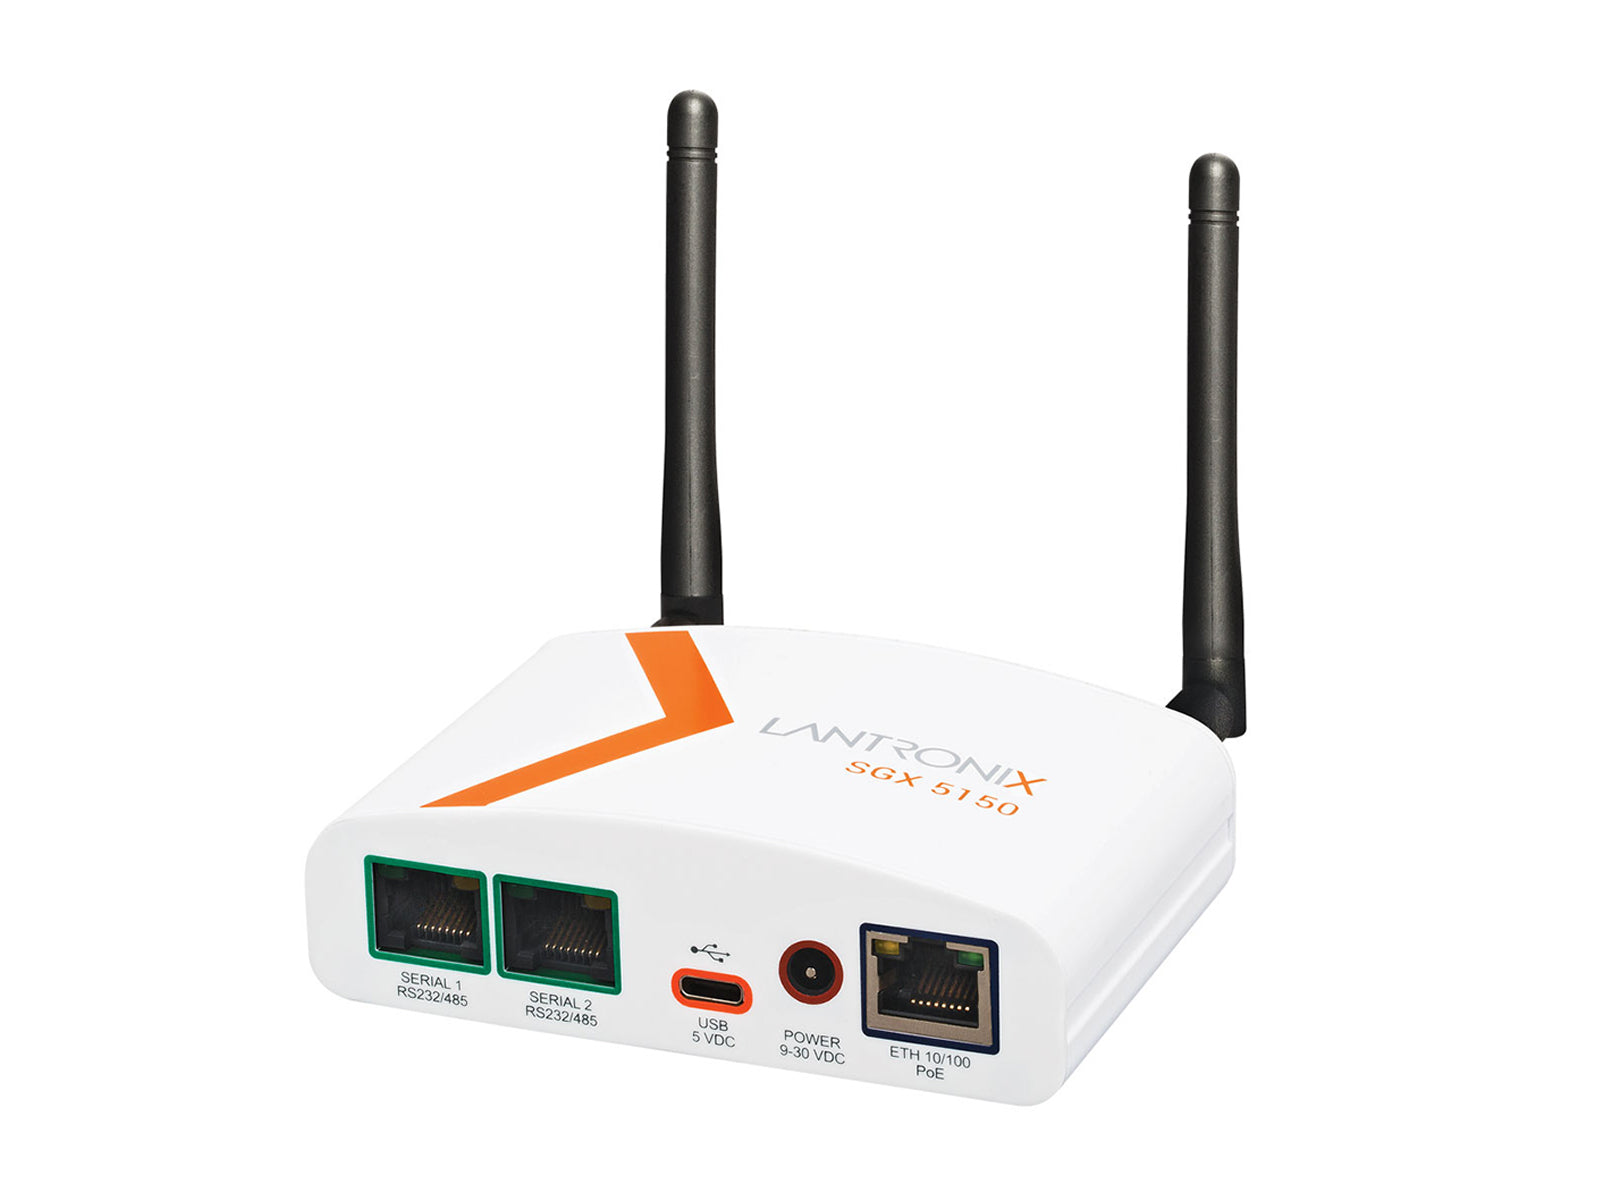 Lantronix SGX 5150 Device Gateway Router Dual Band Wireless and Ethernet (SGX5150000US) Monitors.com 